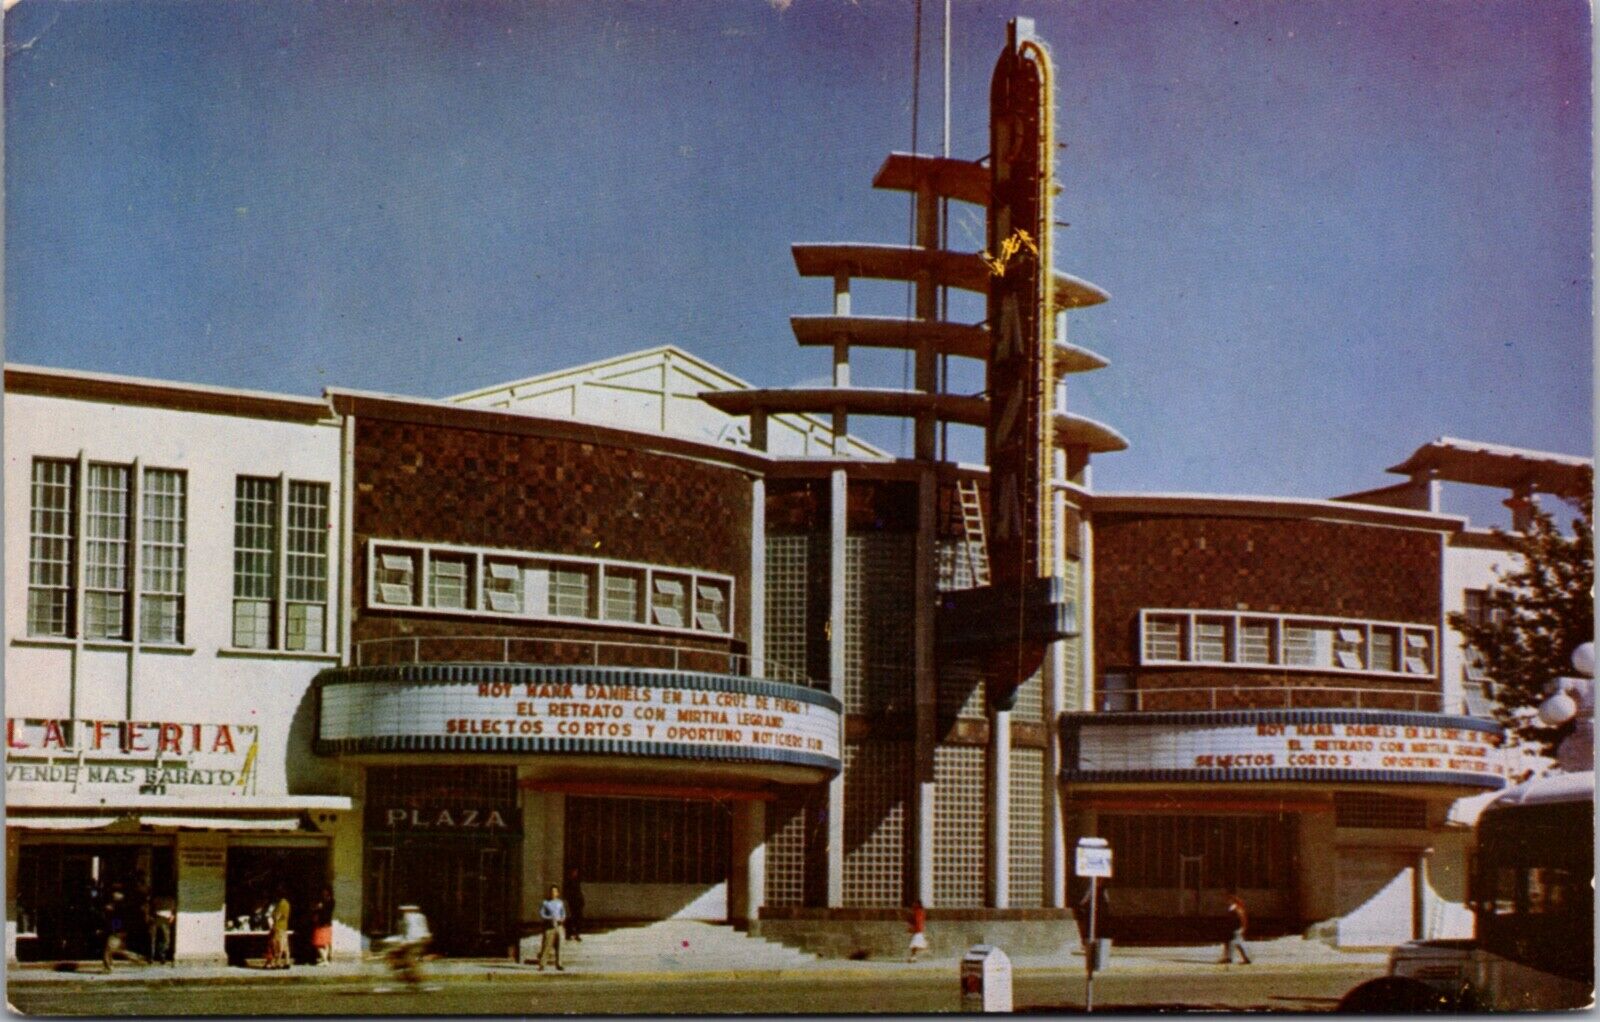 Postcard Beautiful Structure of the Plaza Theatre in Juarez, Old Mexico